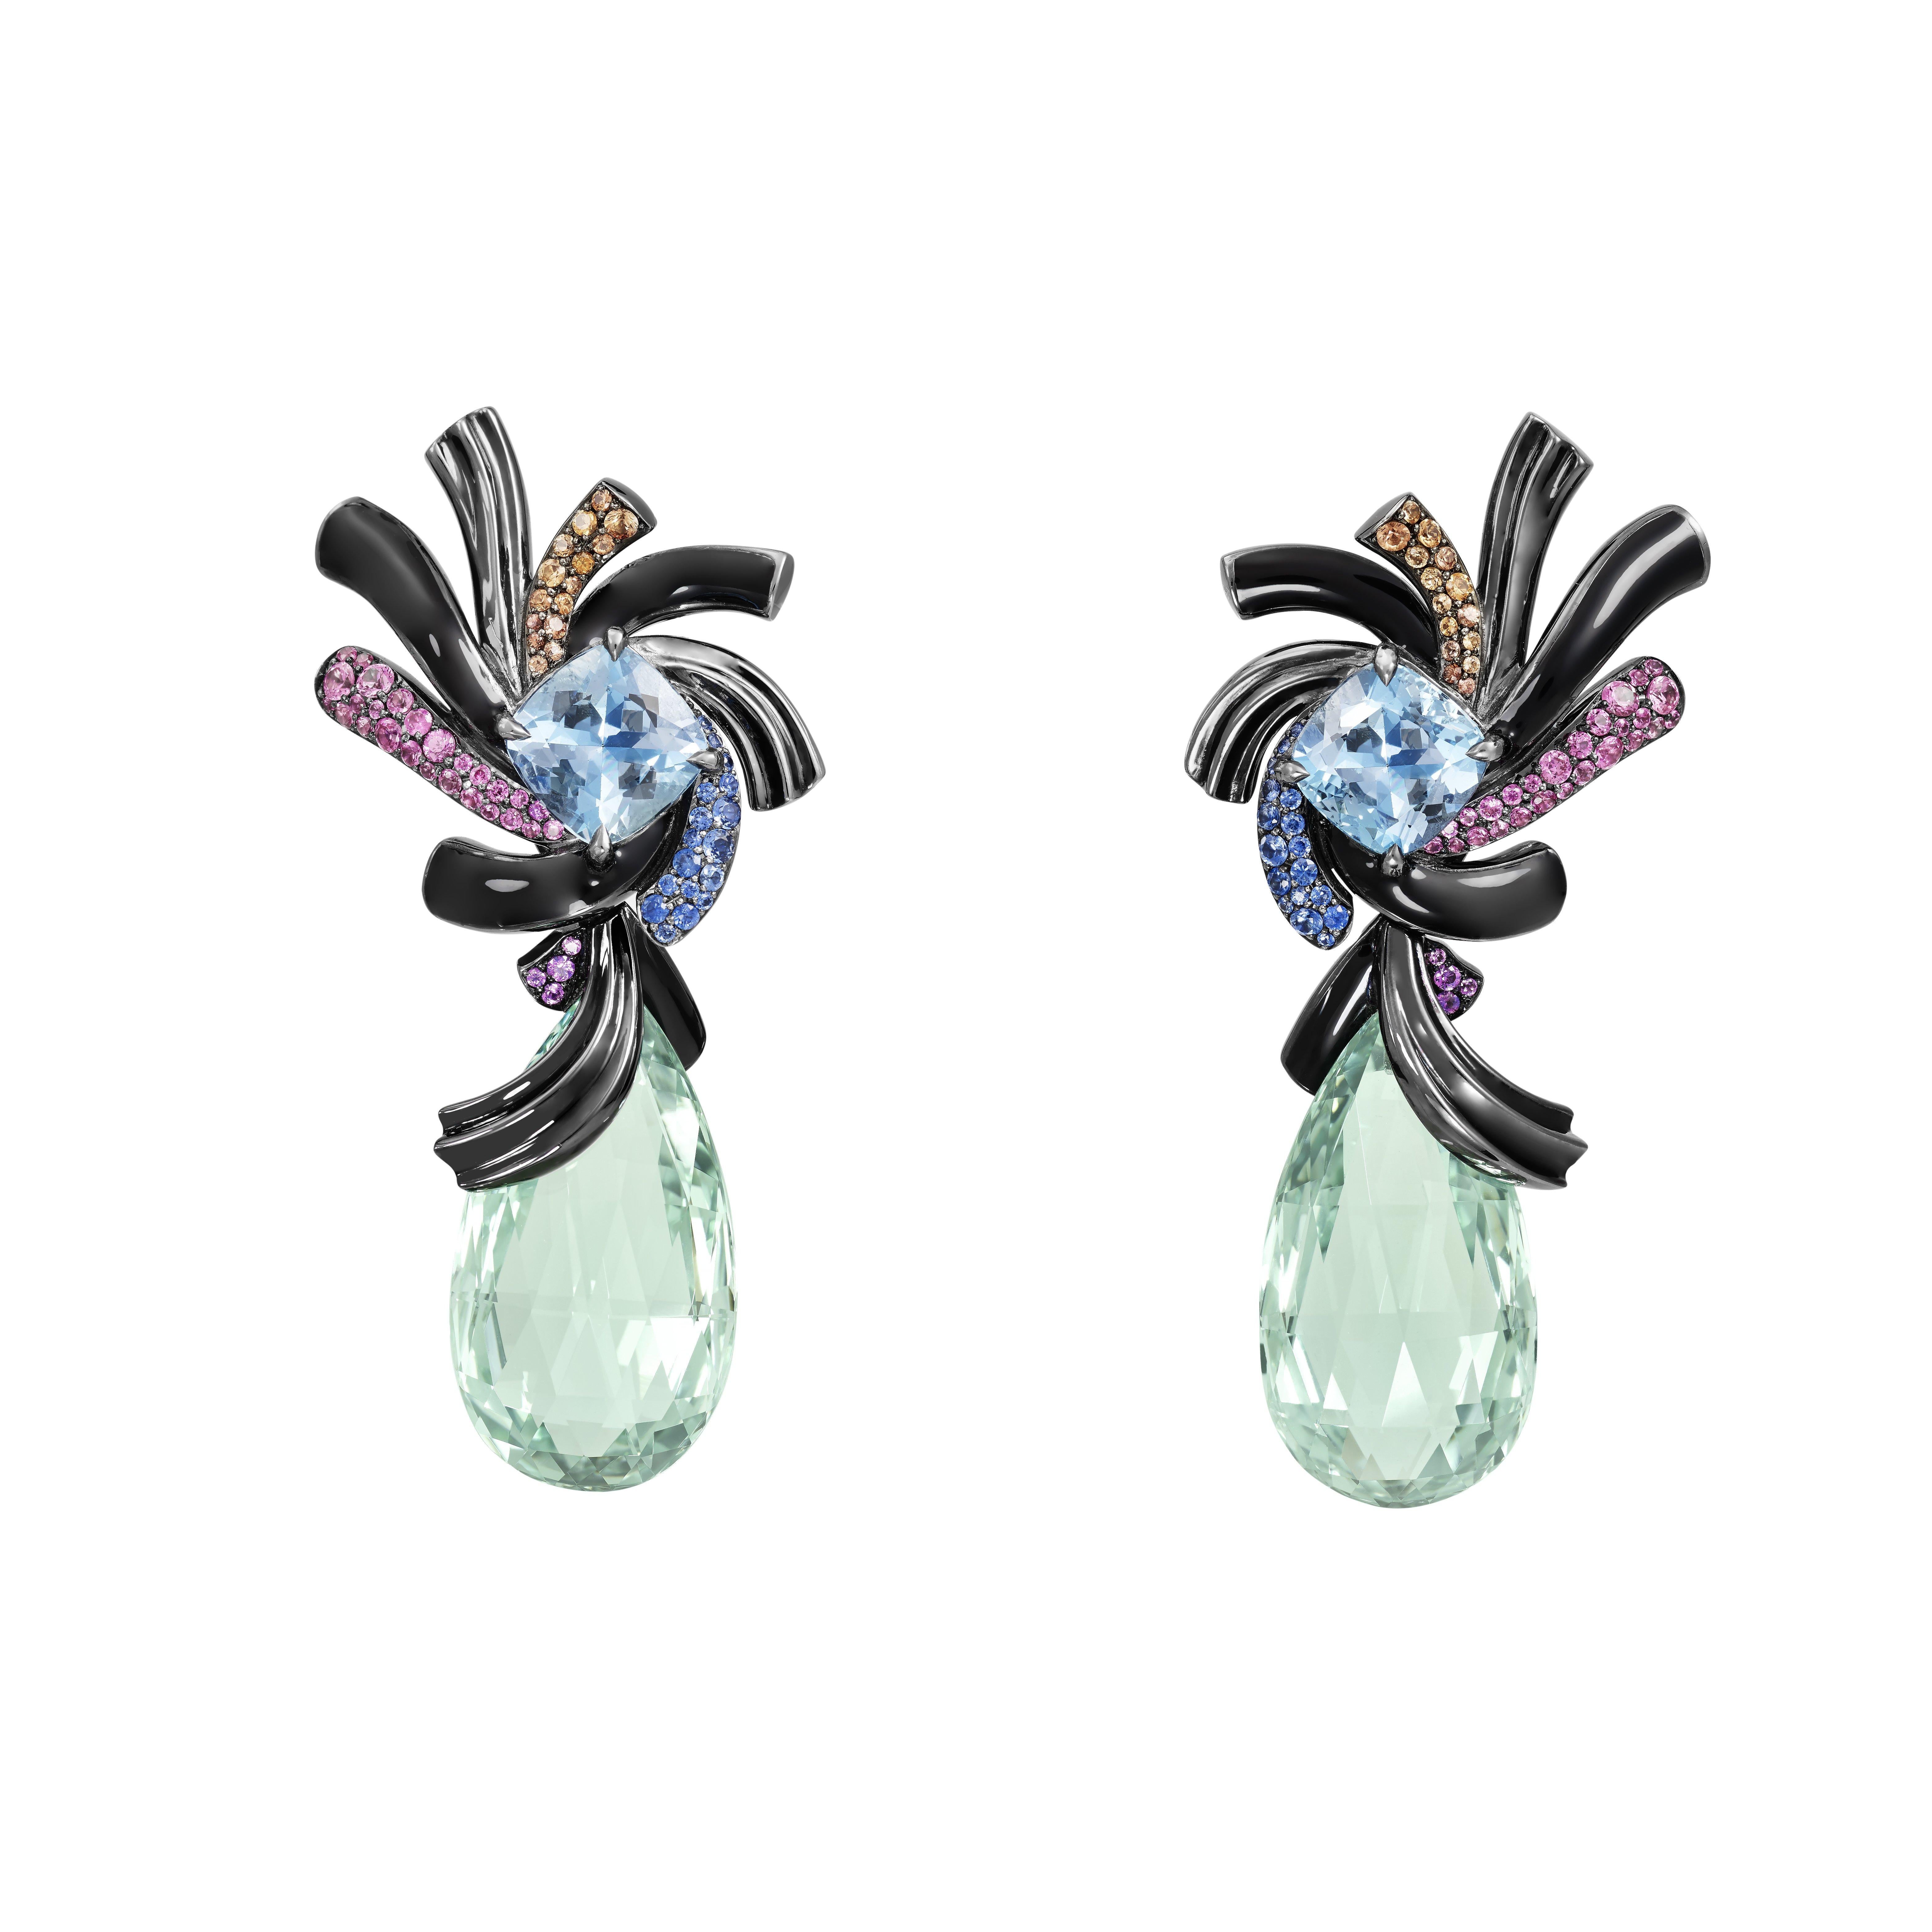 These exceptionnal earrings are part of Lorenz Bäumer's latest Black Magic collection. Composed of white gold, these earrings are playing on volumes and colors with the black color highlighting the numerous coloured stones such as these two green